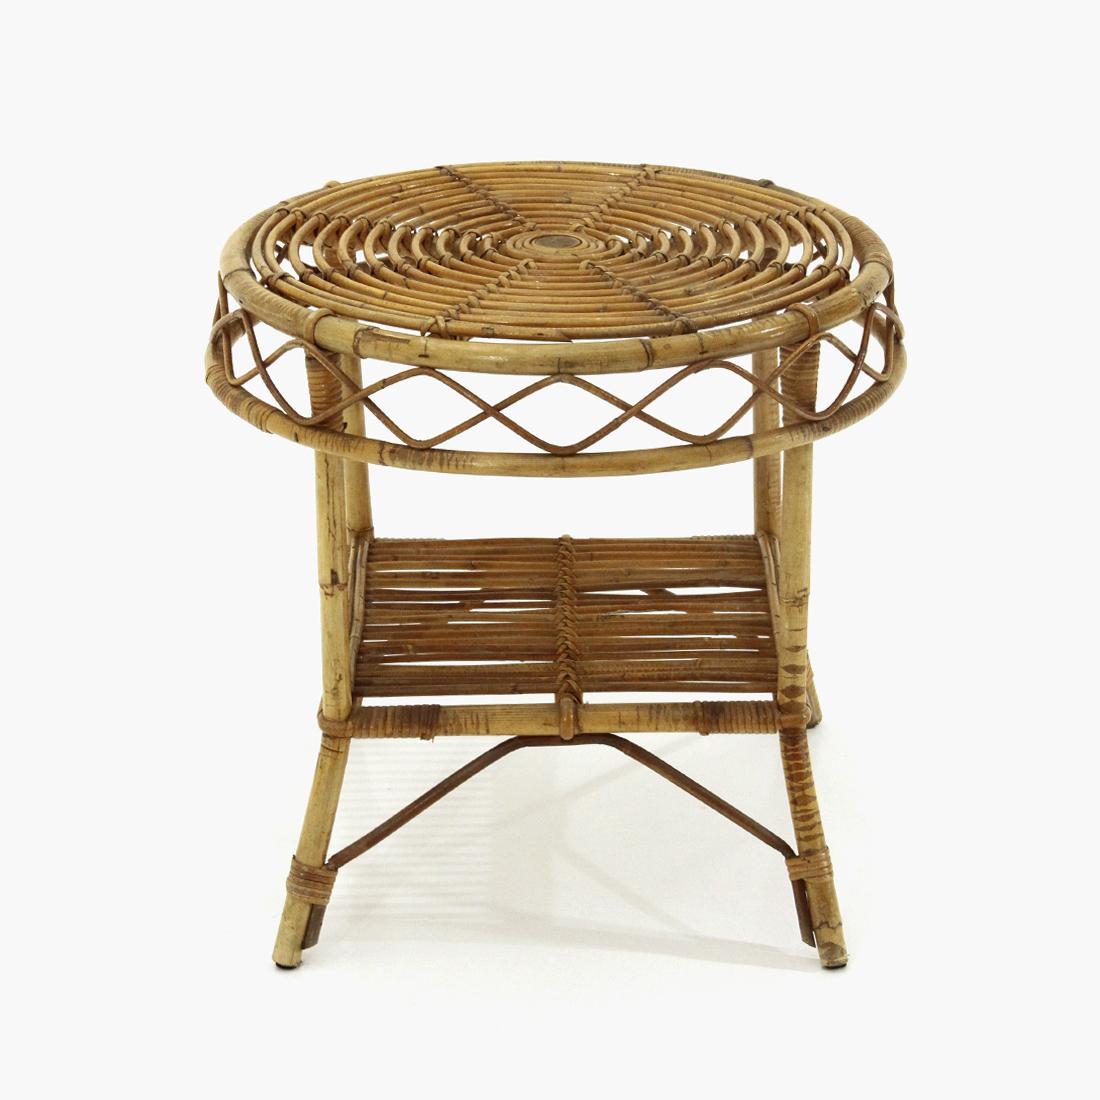 Italian Rattan Coffee Table with Round Top, 1950s For Sale